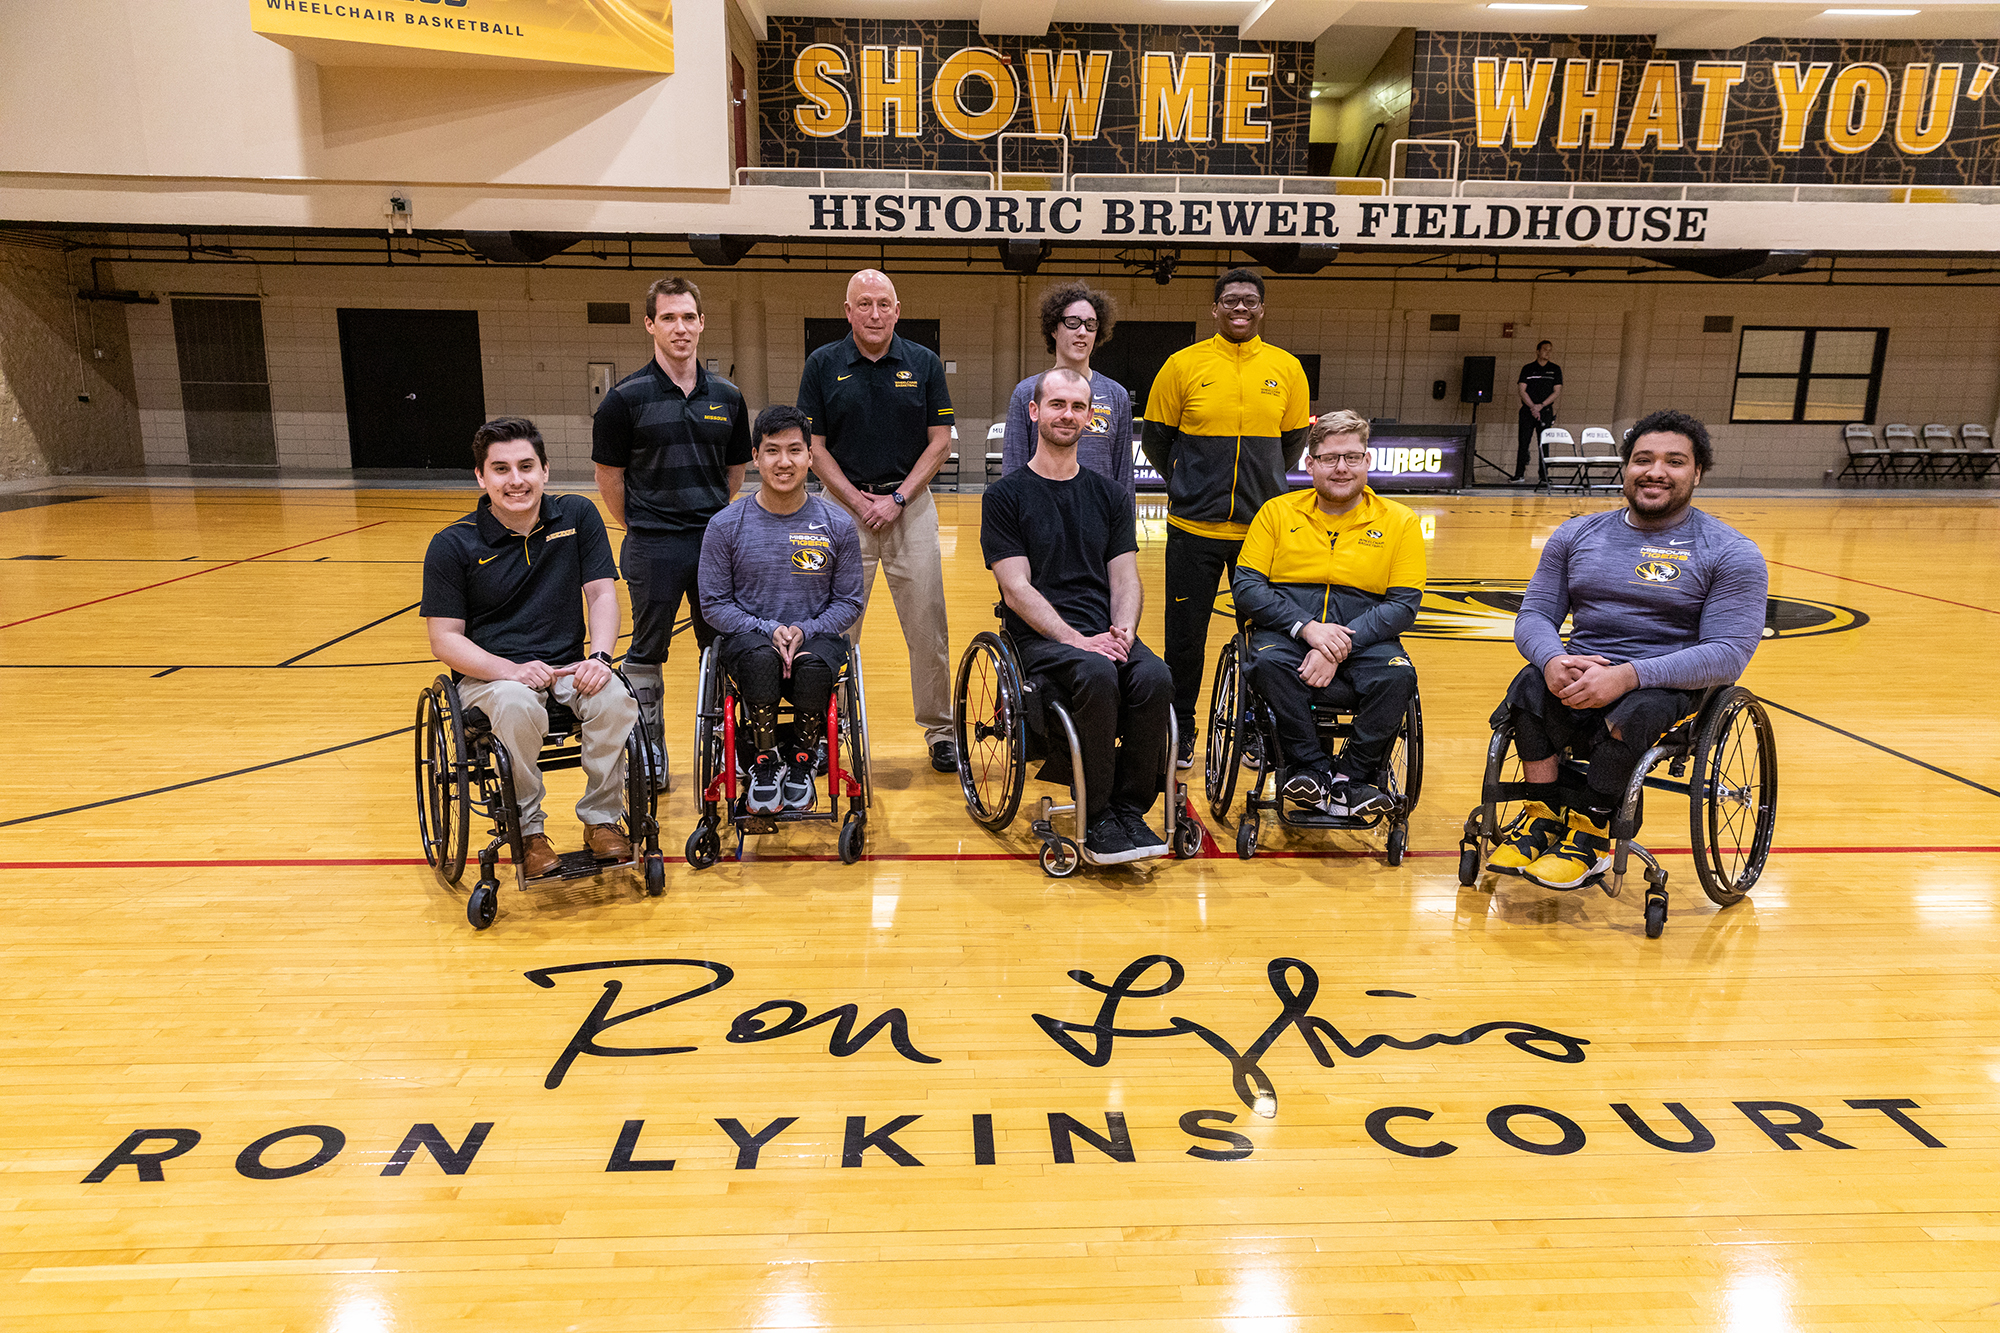 coach lykins and wheelchair basketball team members on the court